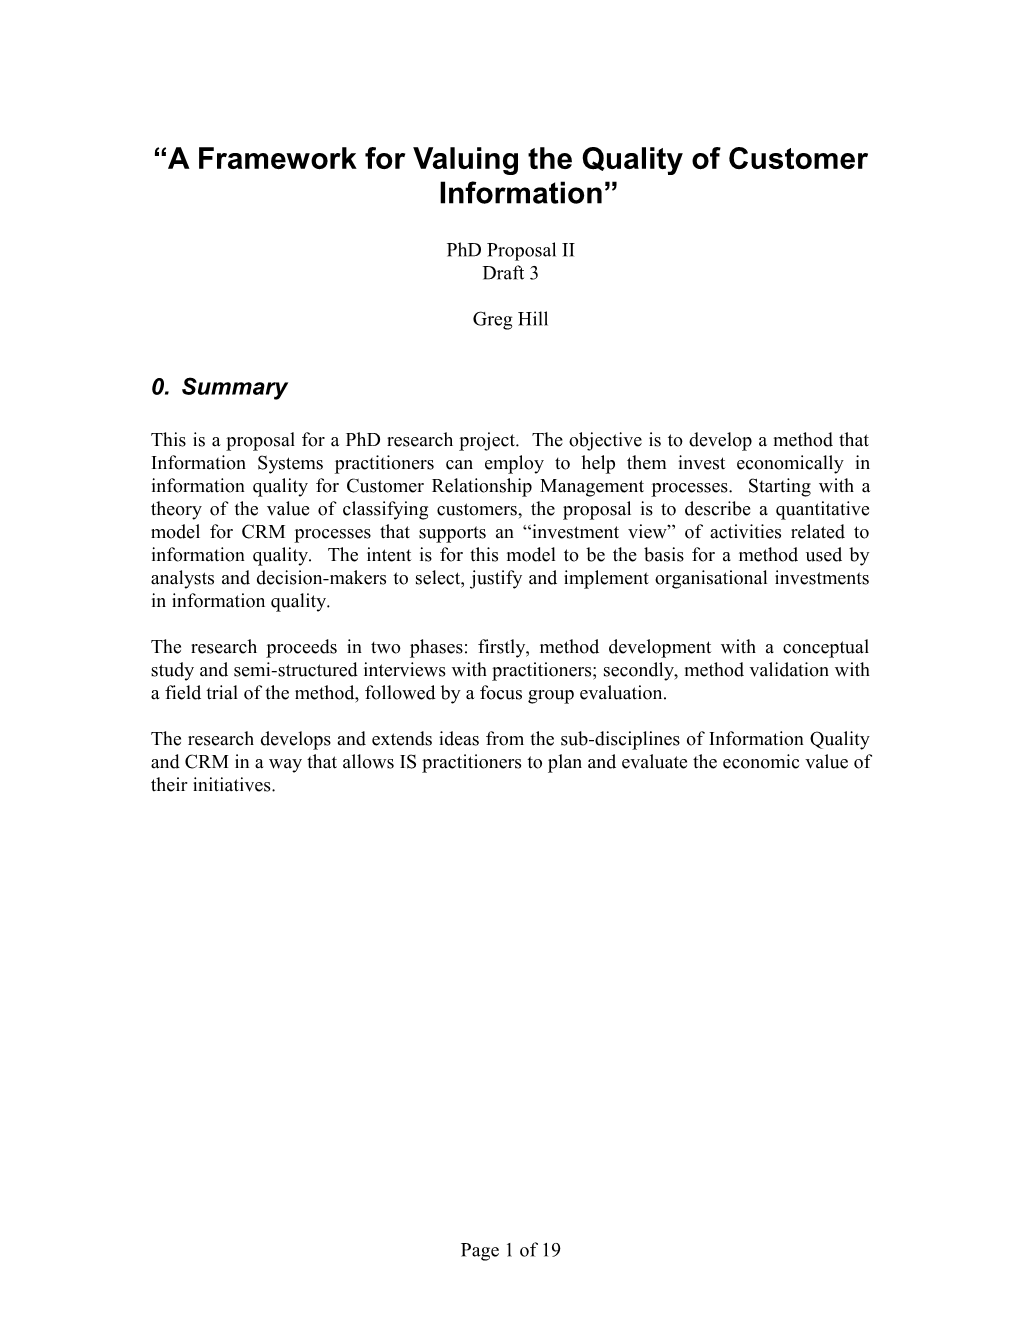 A Framework for Valuing the Quality of Customer Information